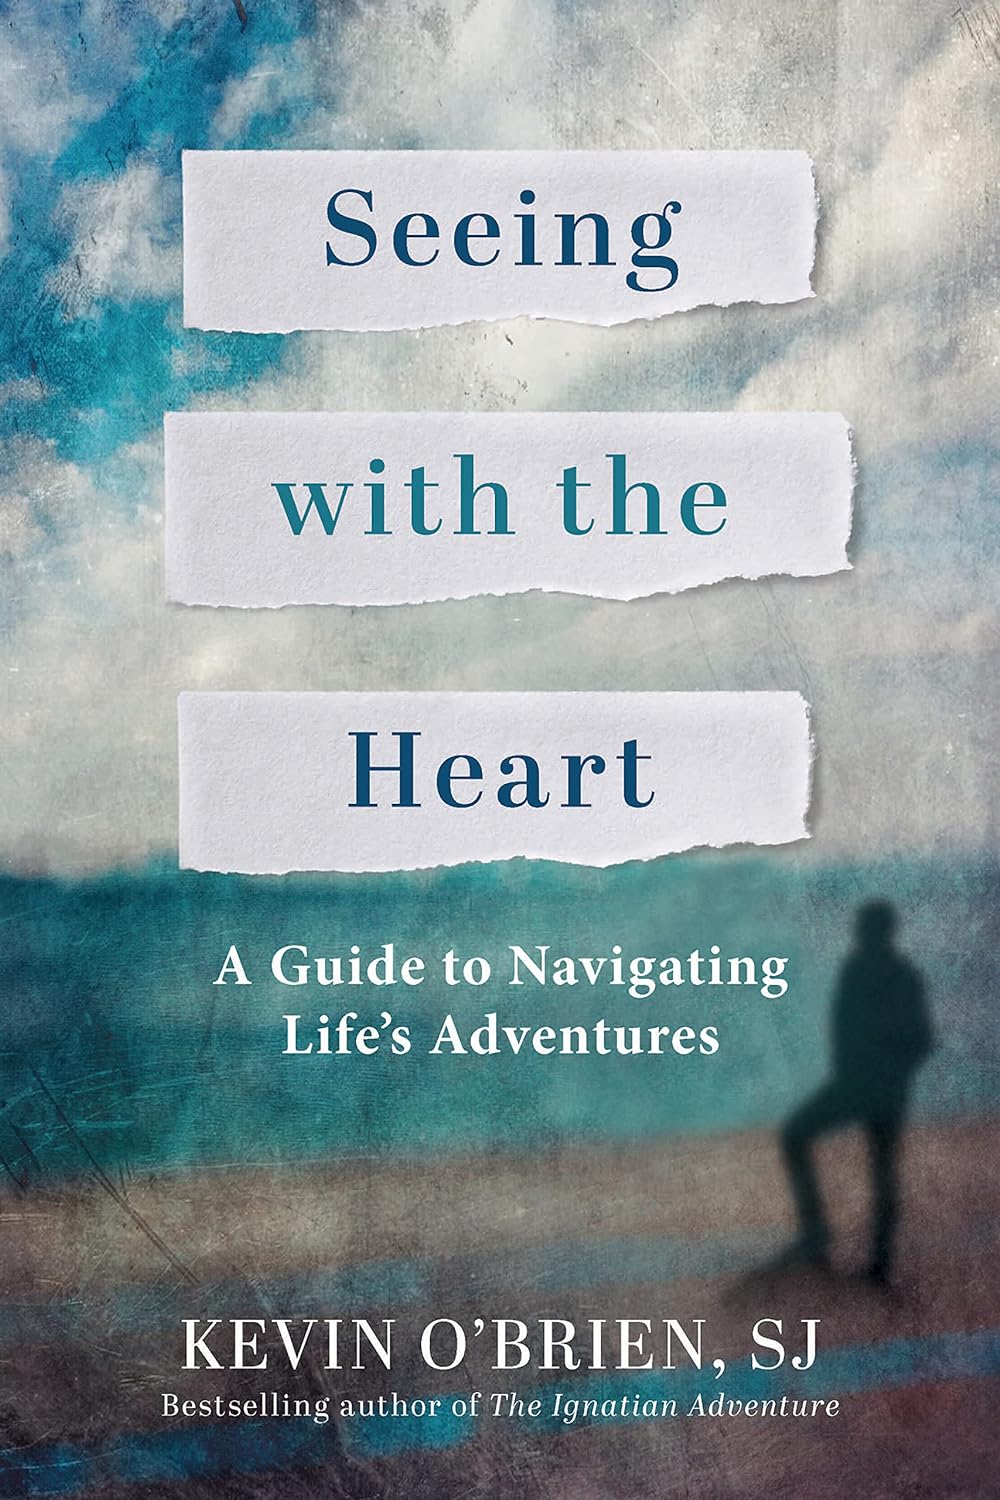 Seeing with the Heart Guide to Navigating Life's Adventures